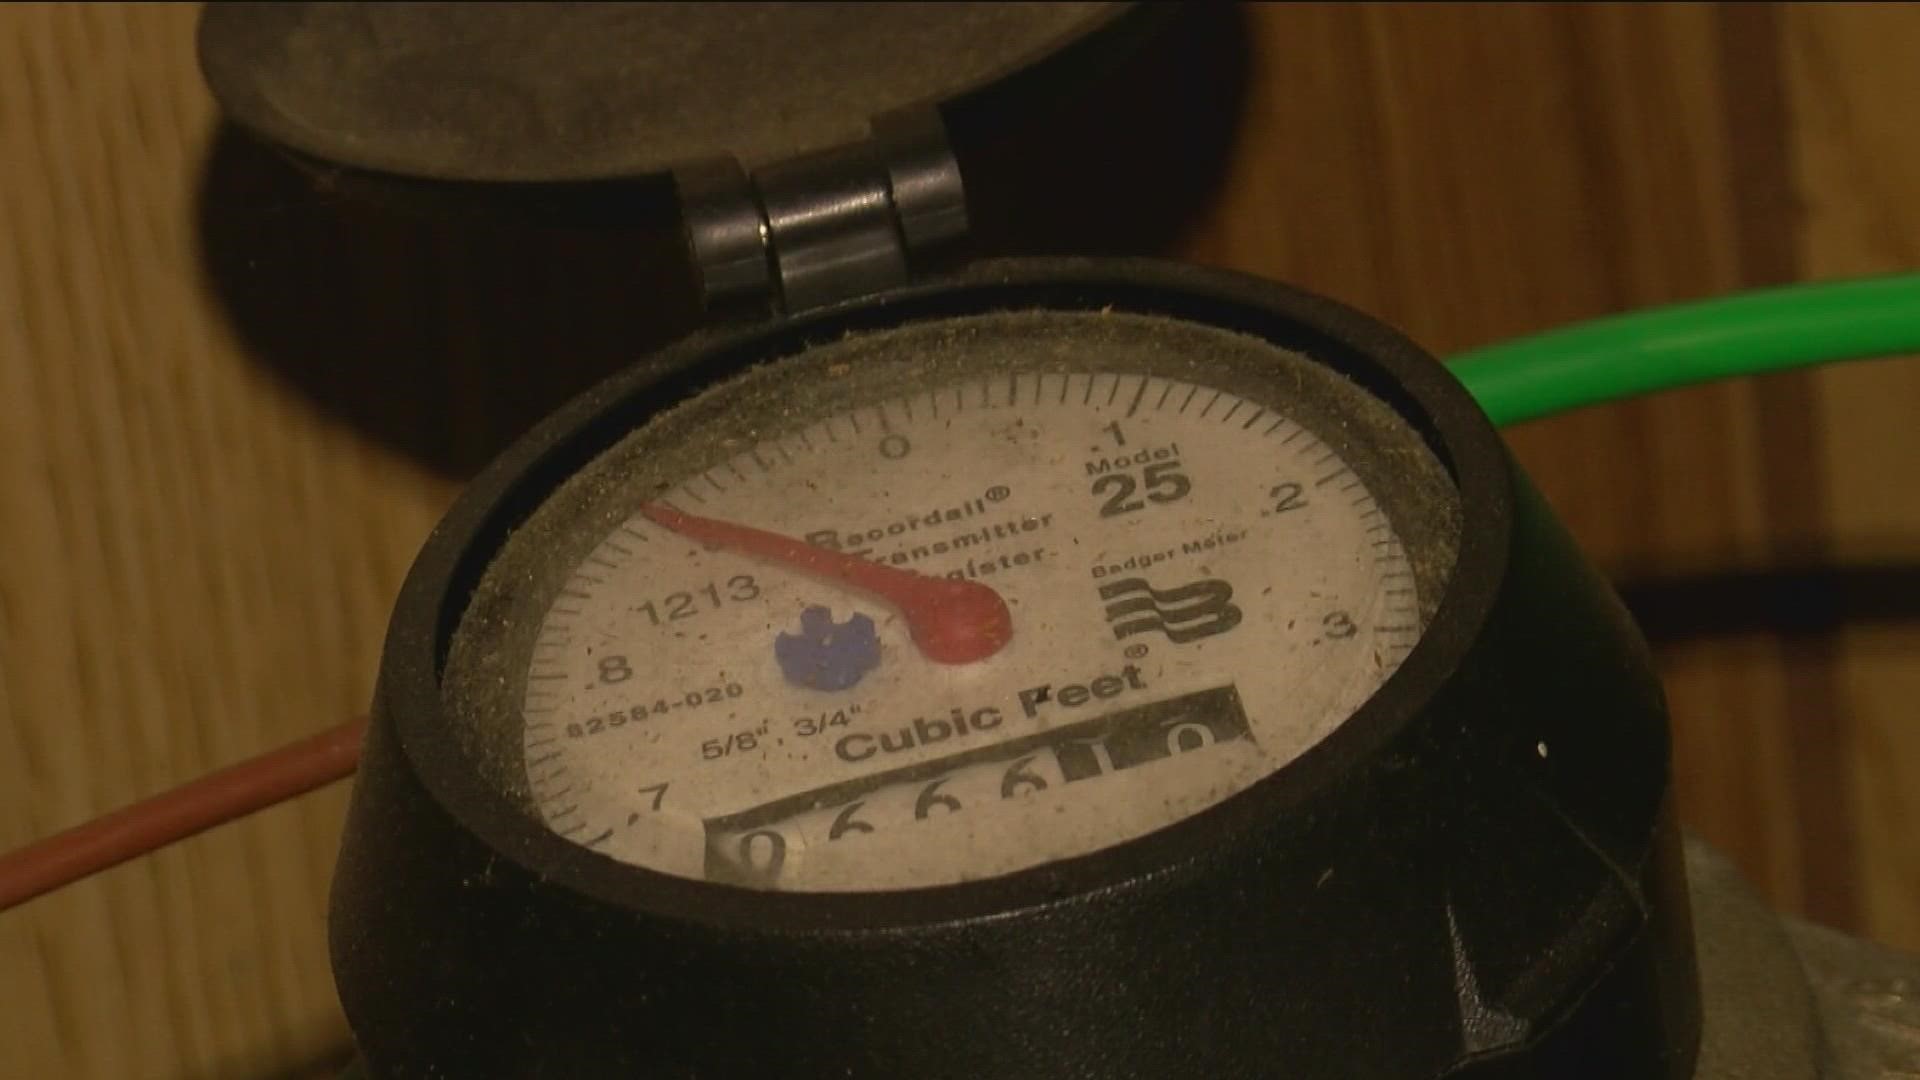 Toledo residents say the new water meters are not installed for free as promised.